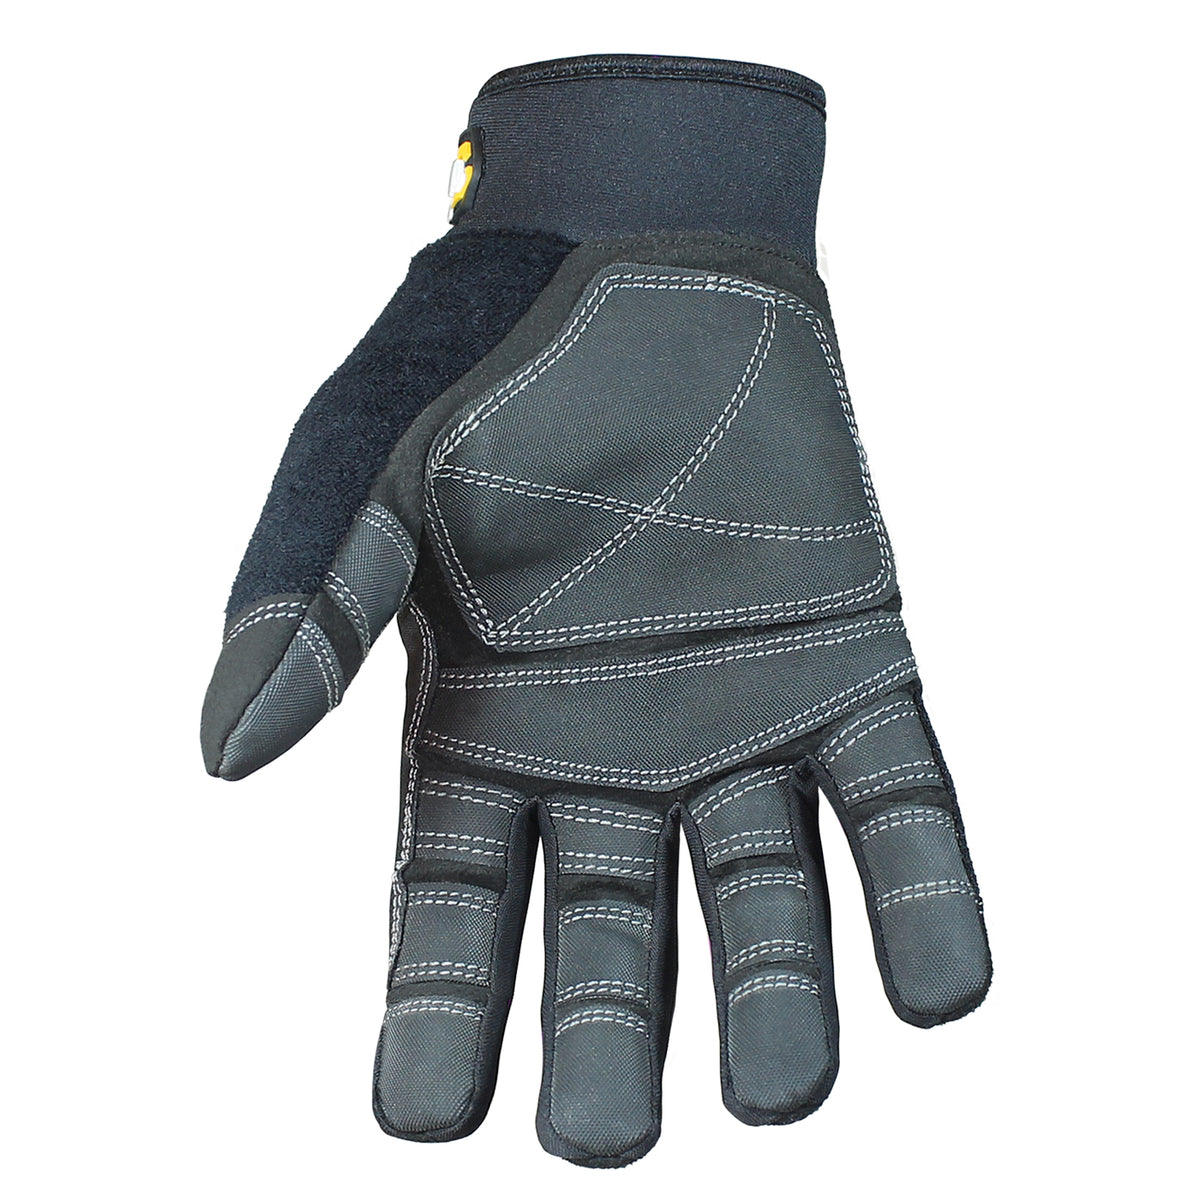 Firm Grip Large Utility Work Gloves (3-Pair)